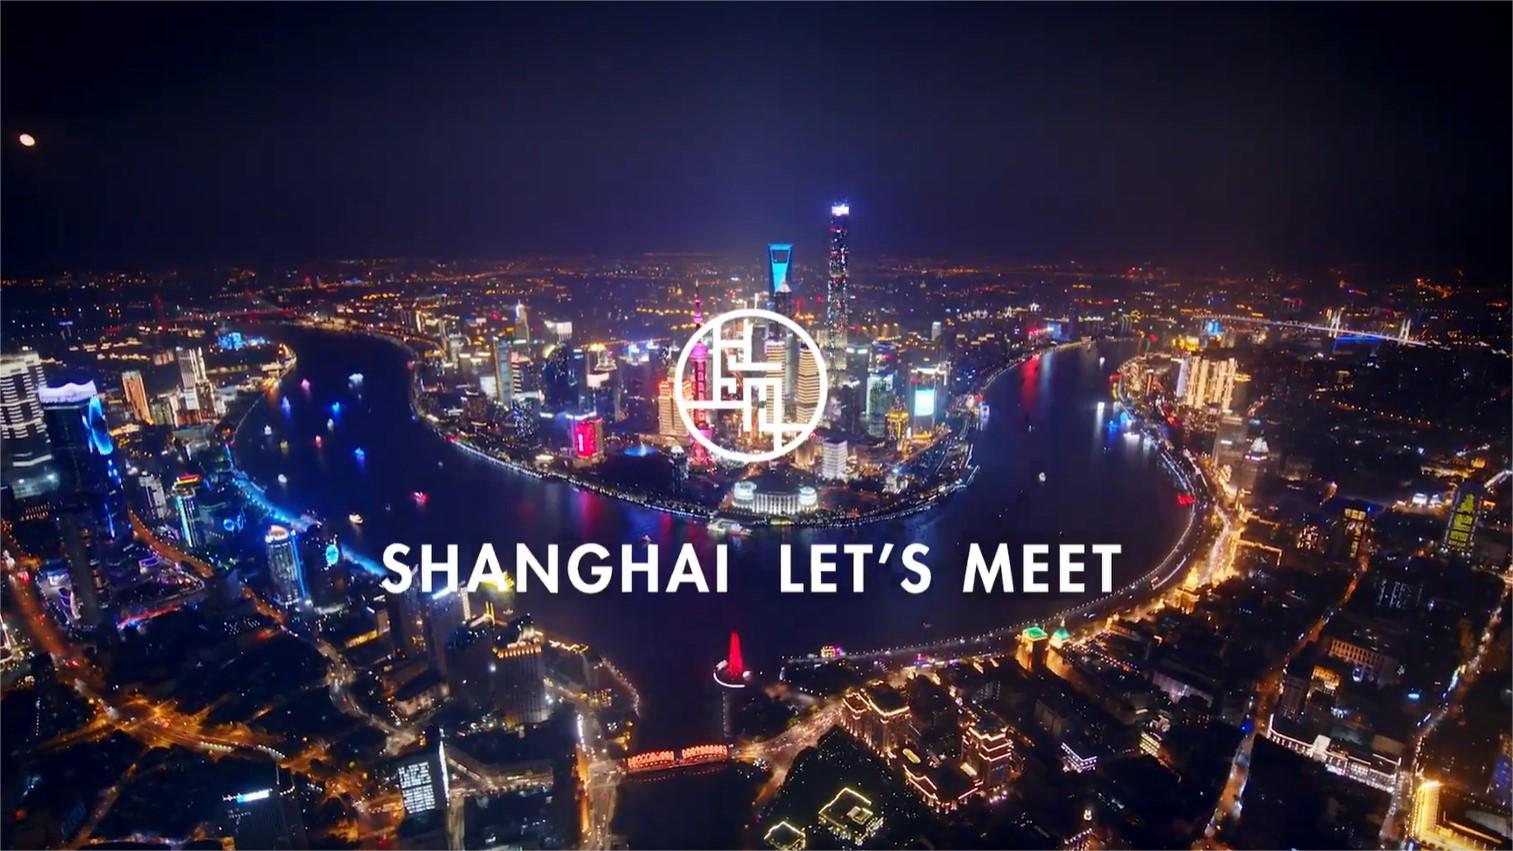 Shanghai releases new promotional video to attract global audiences